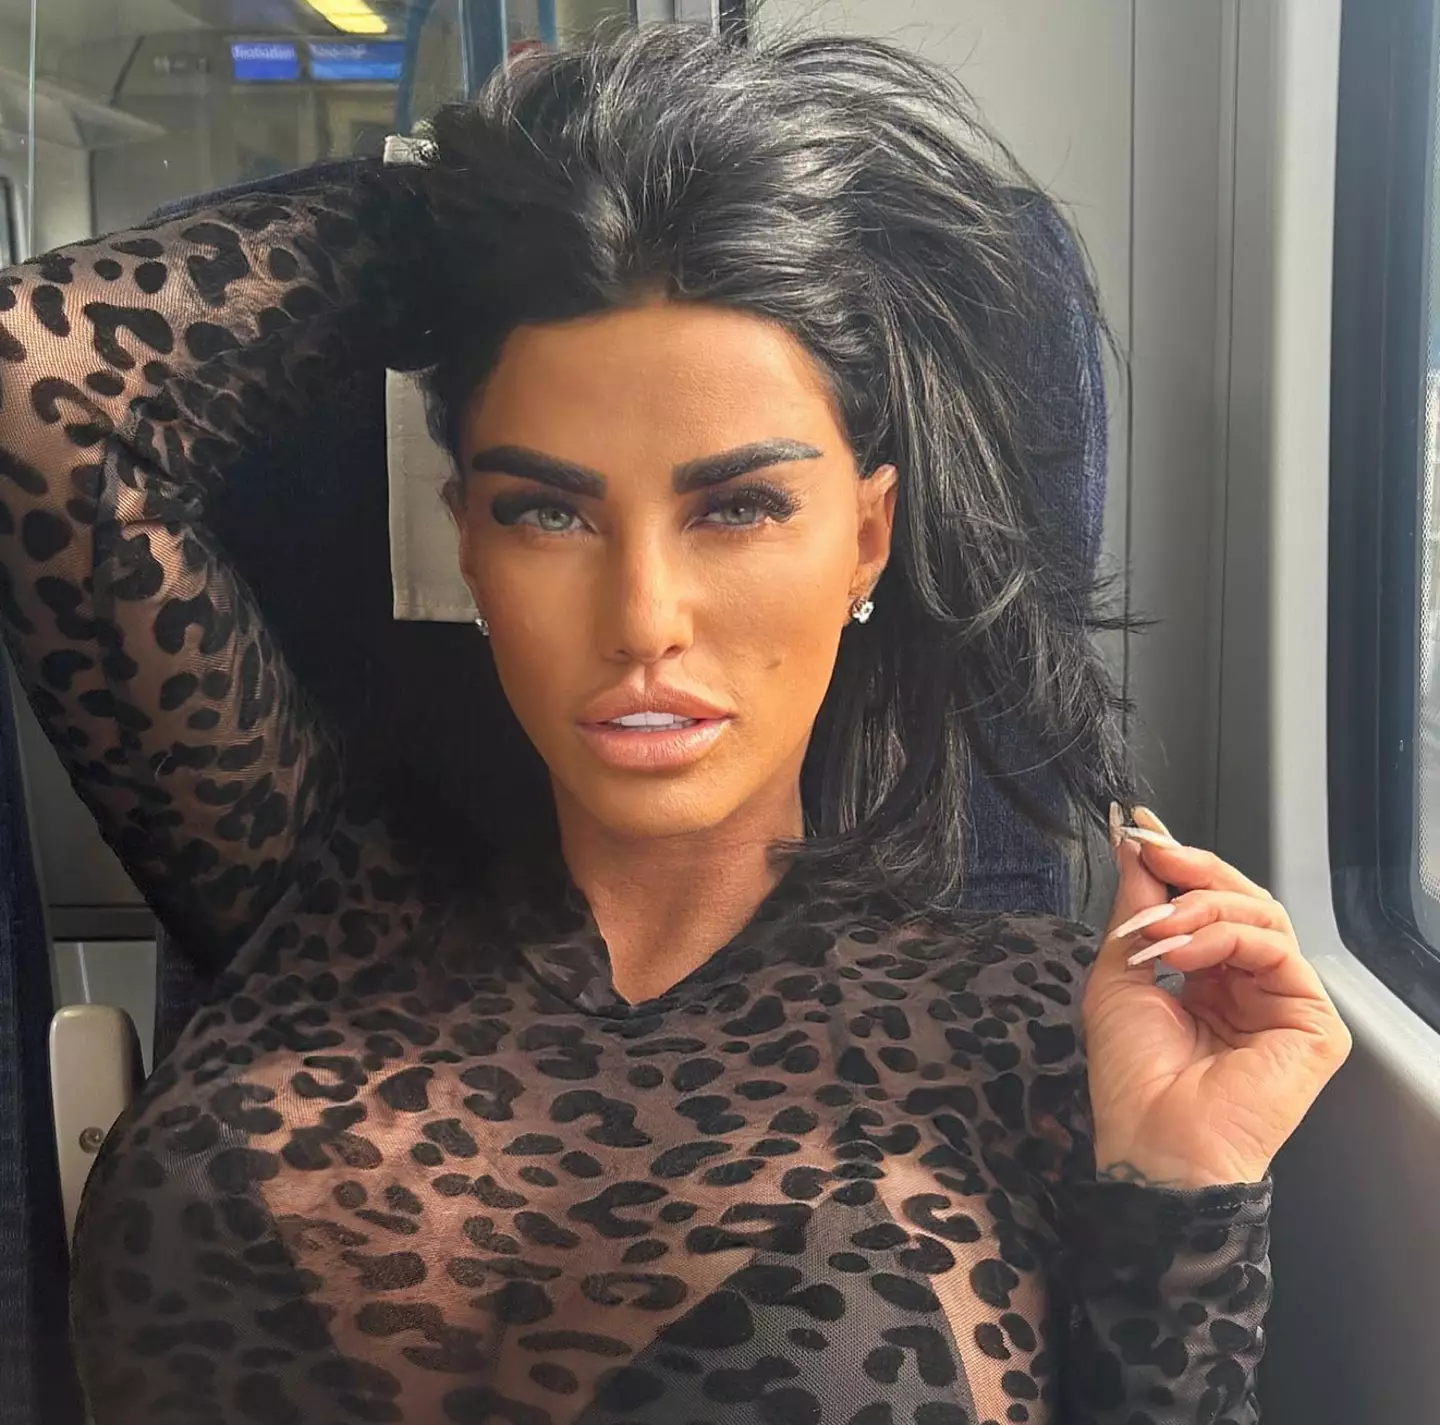 Katie Price hits back at people's false assumption that she's 'easy'.